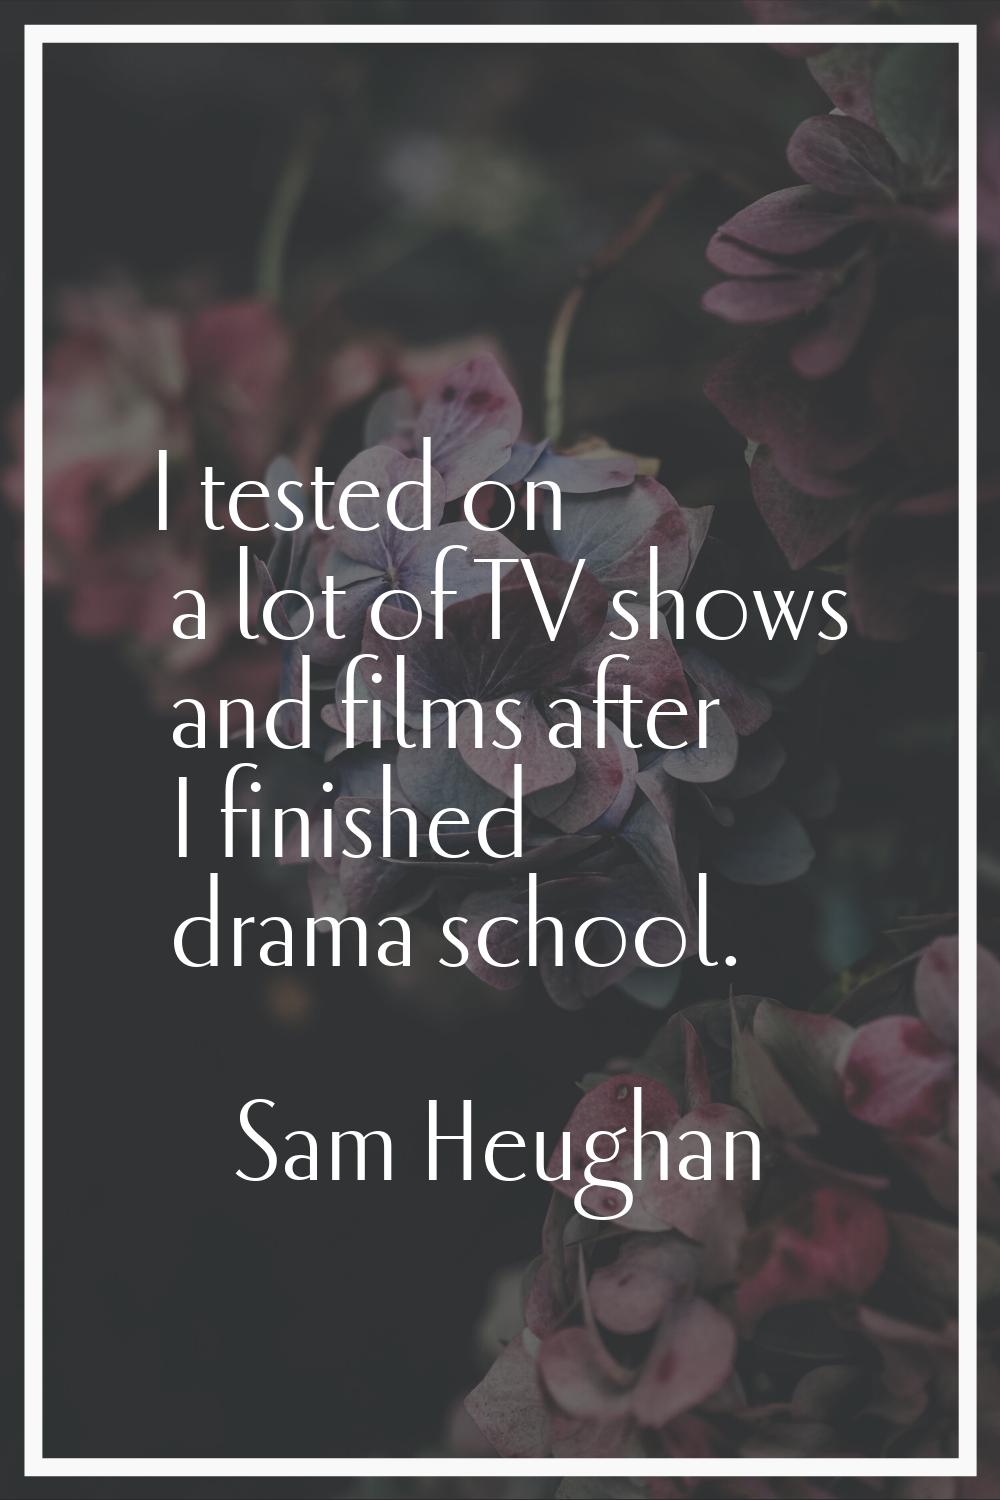 I tested on a lot of TV shows and films after I finished drama school.